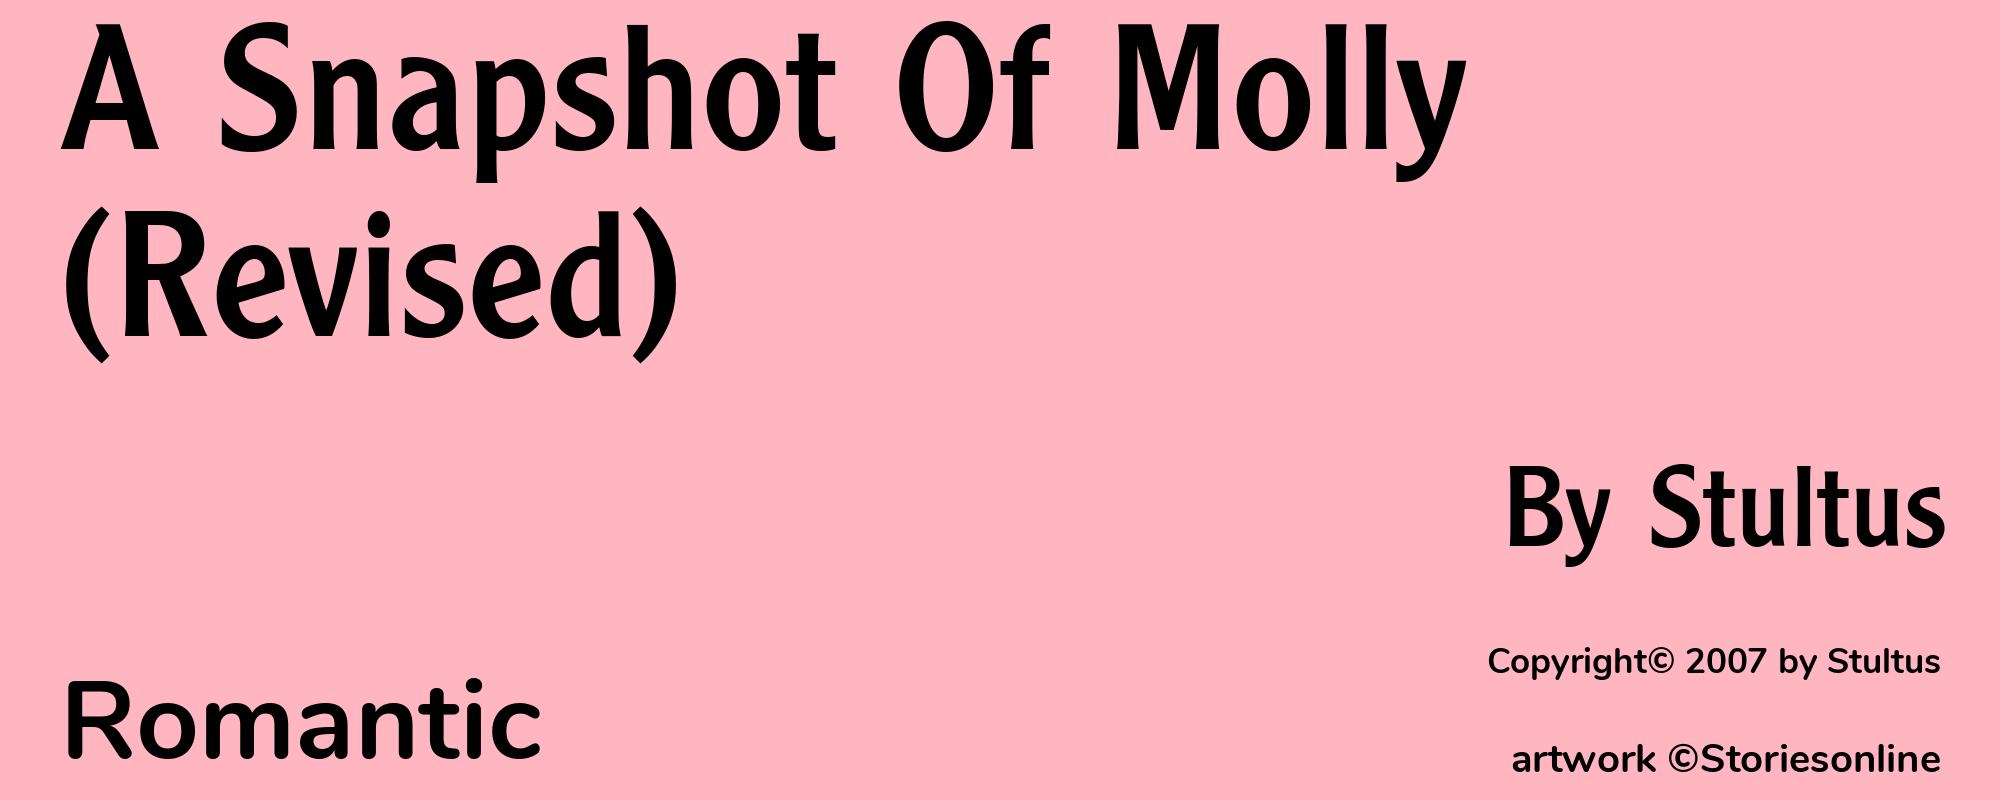 A Snapshot Of Molly (Revised) - Cover